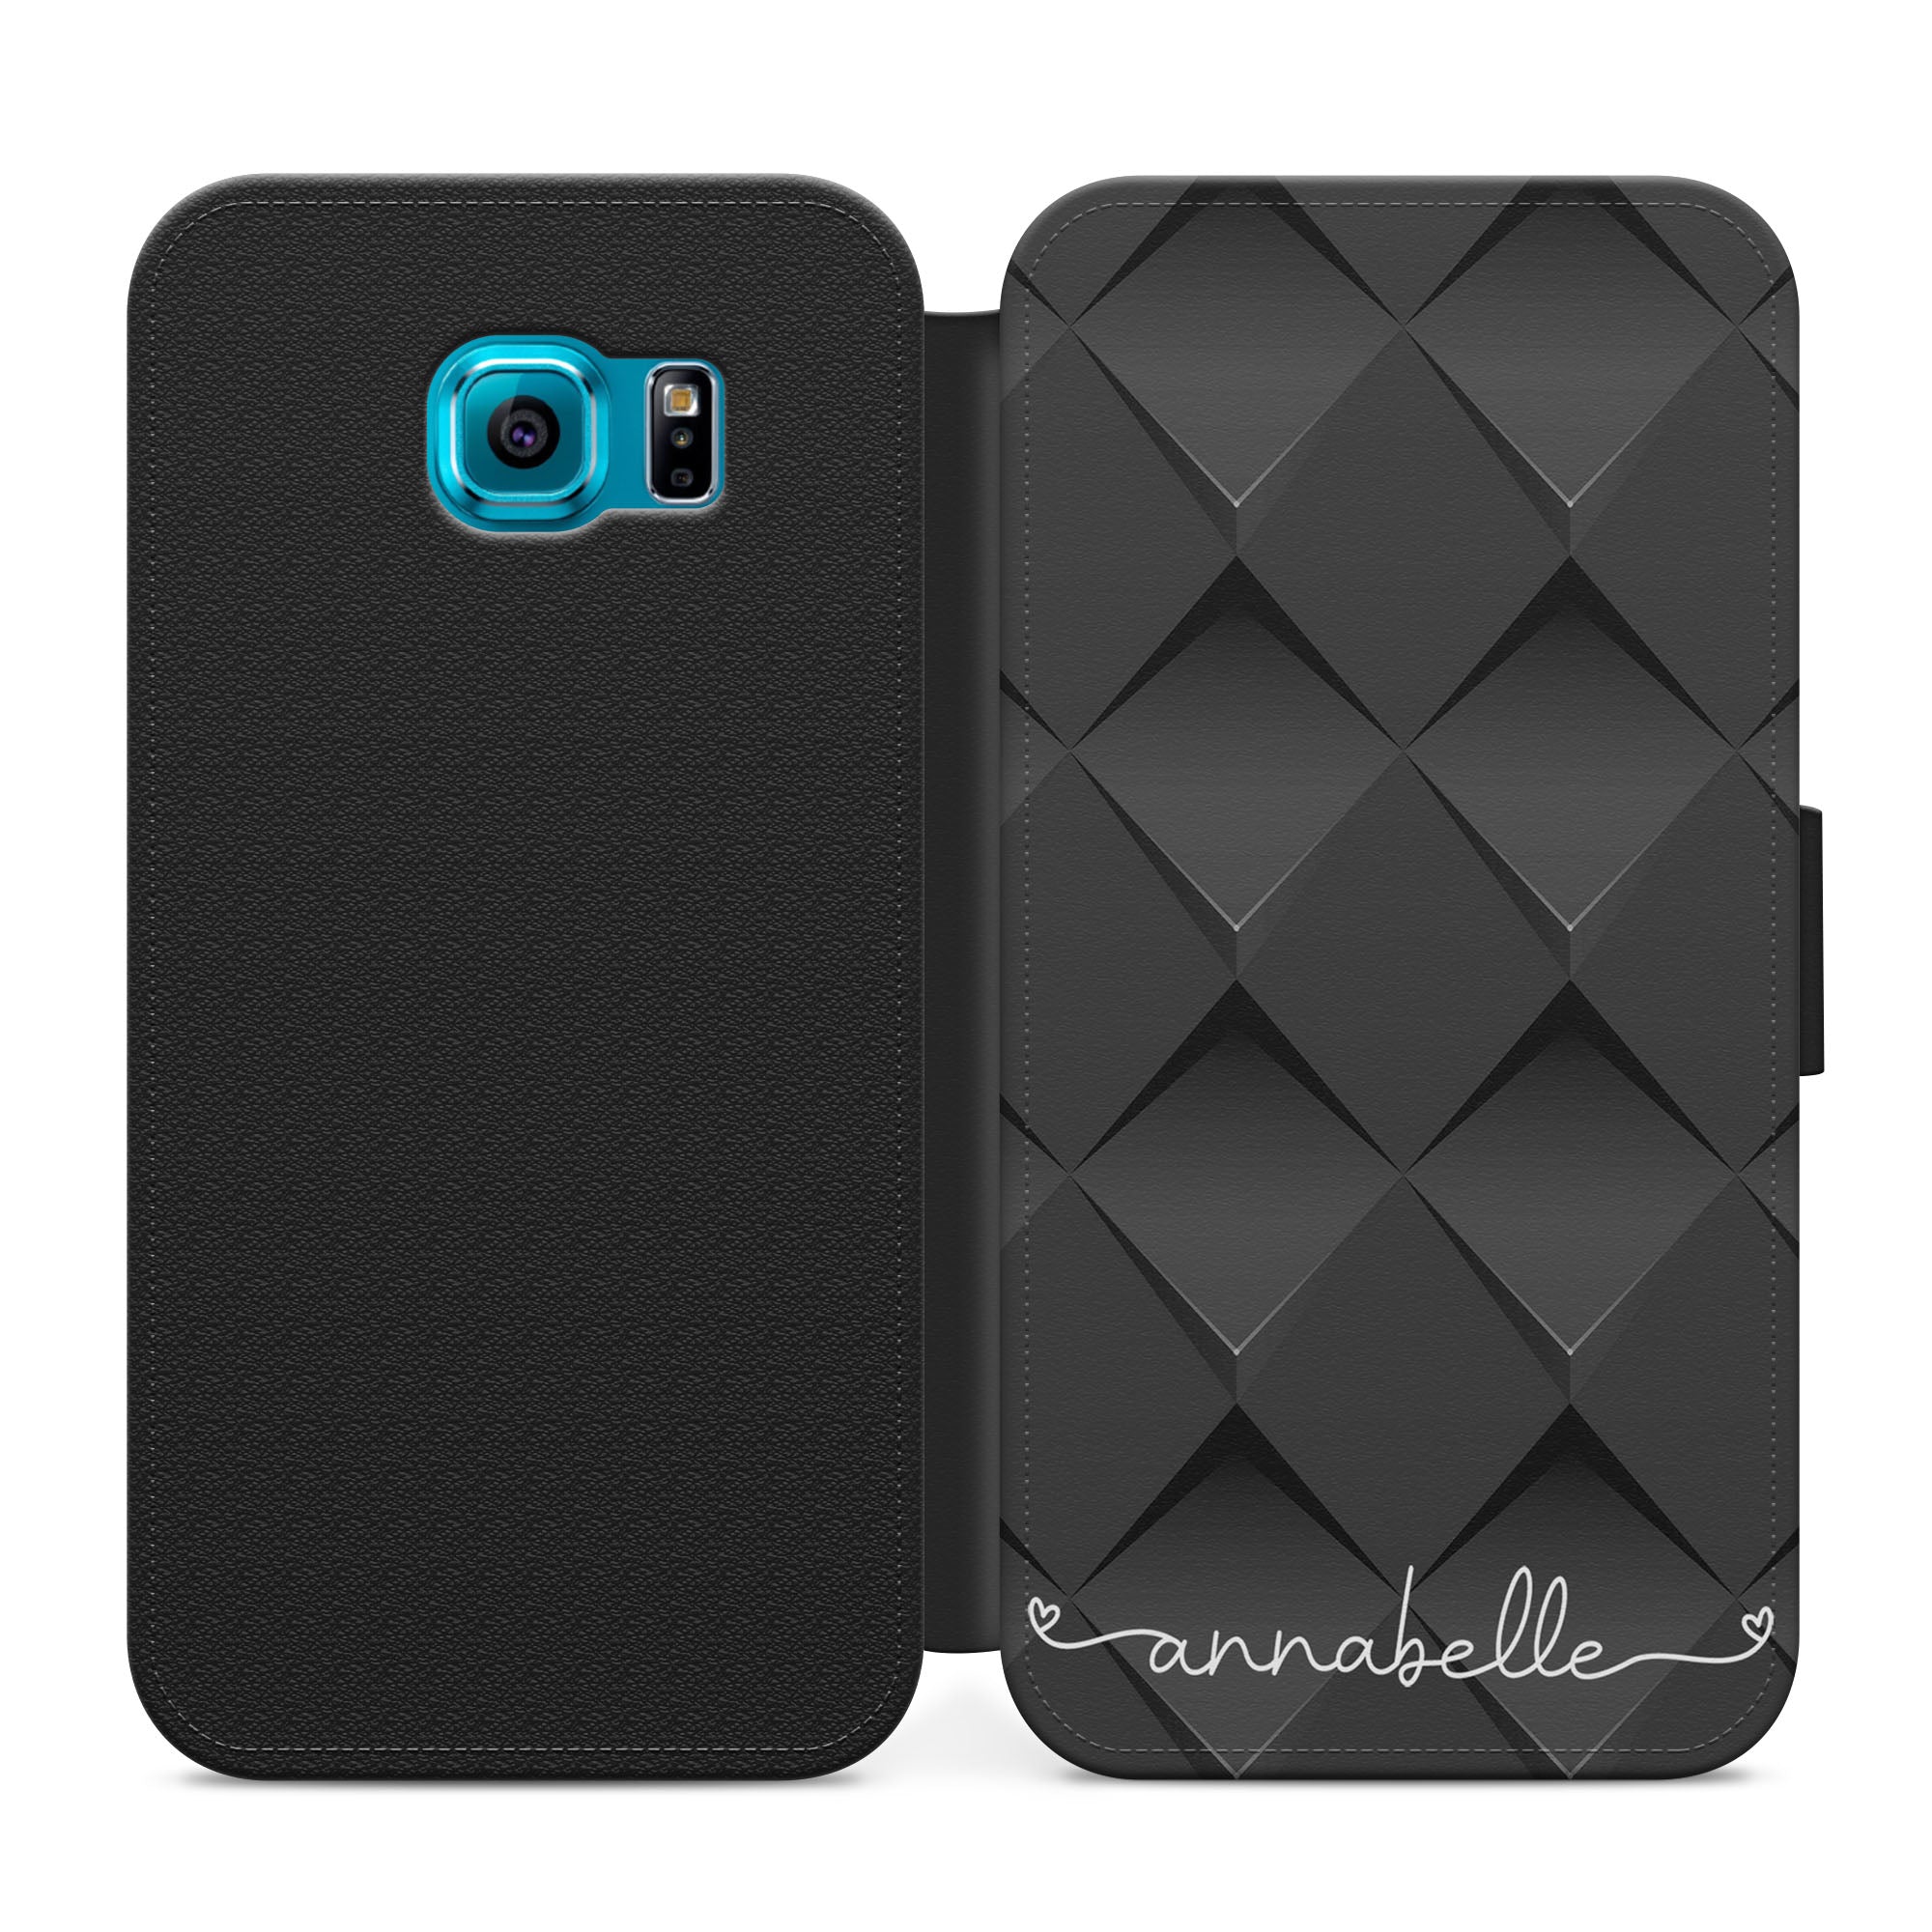 Personalised Black Geometric Faux Leather Flip Case Wallet for iPhone / Samsung